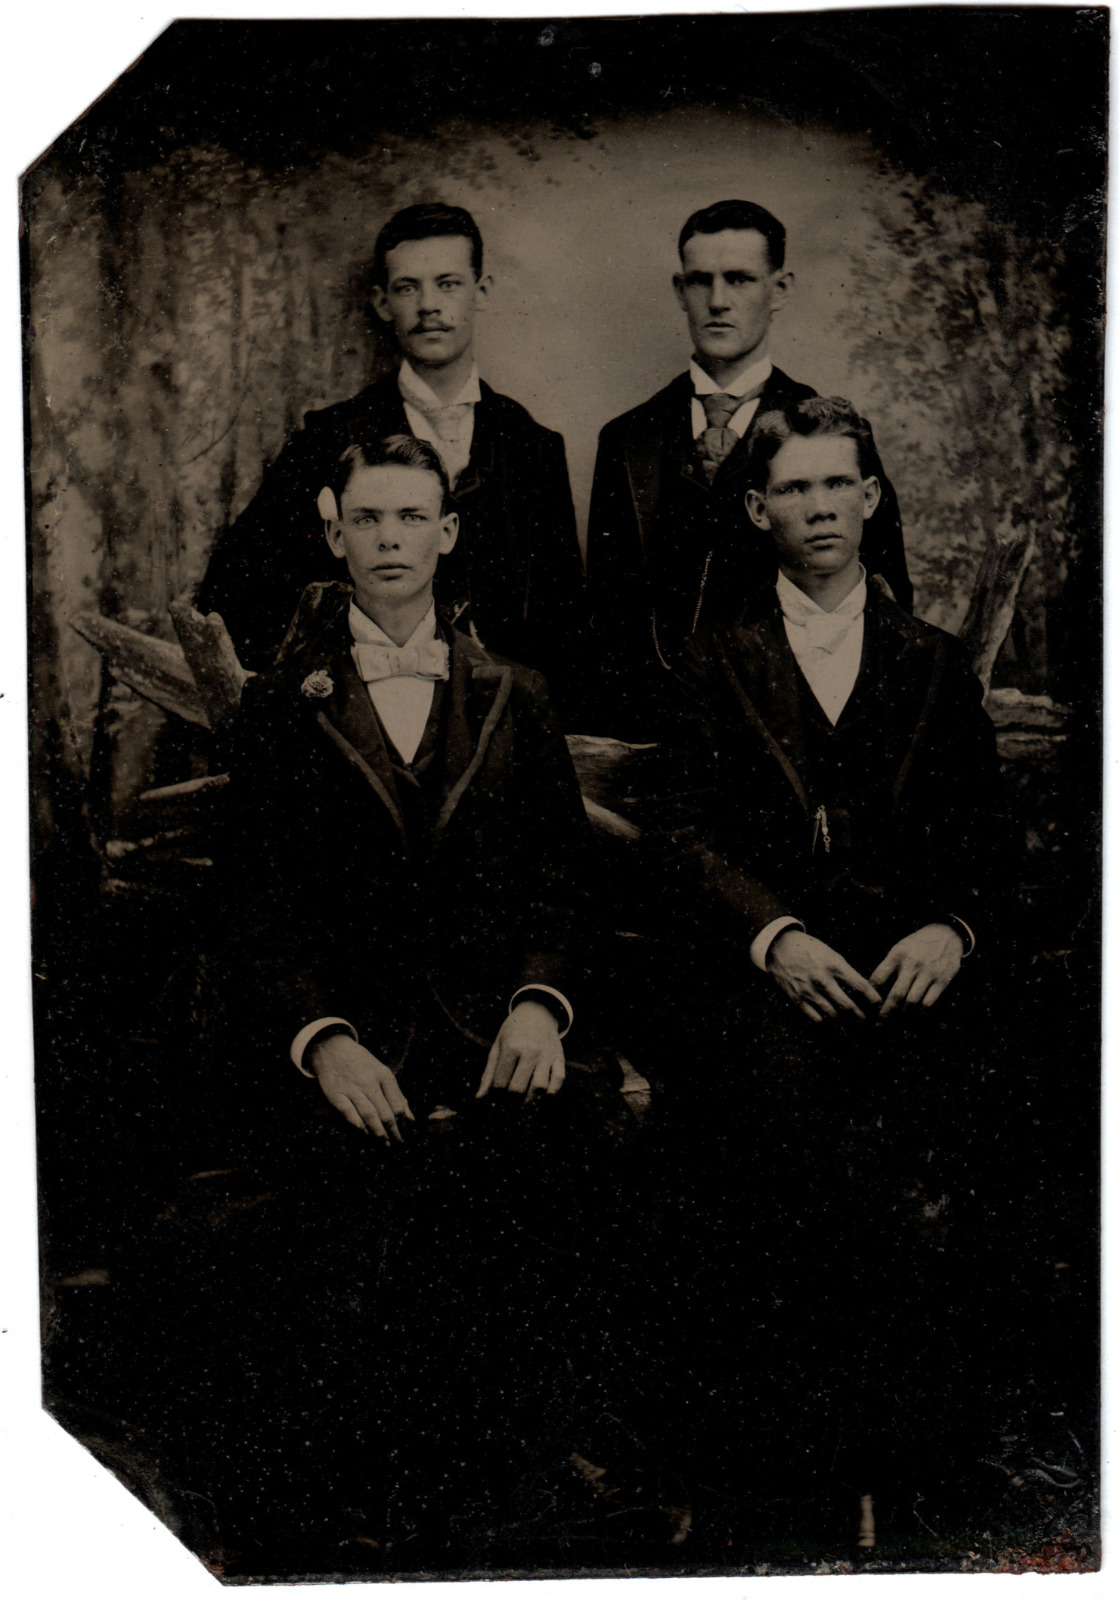 CIRCA 1870s TINTYPE FORMAL PHOTOGRAPH OF 4 BROTHERS IN SUITS